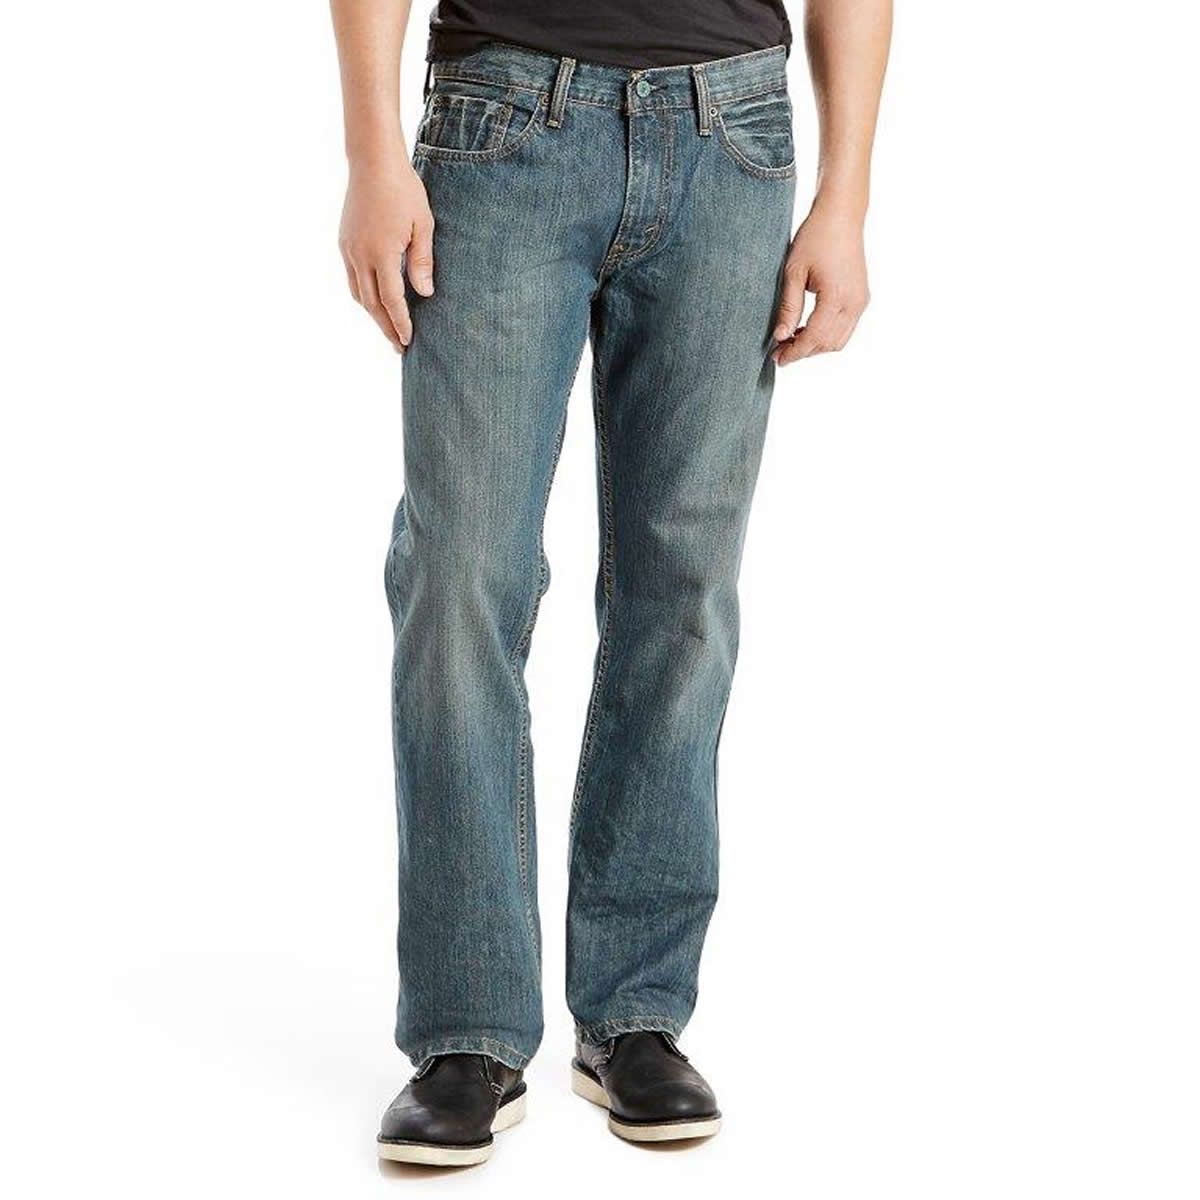 Clearance/Closeout Levis Jeans for Men - Macy's